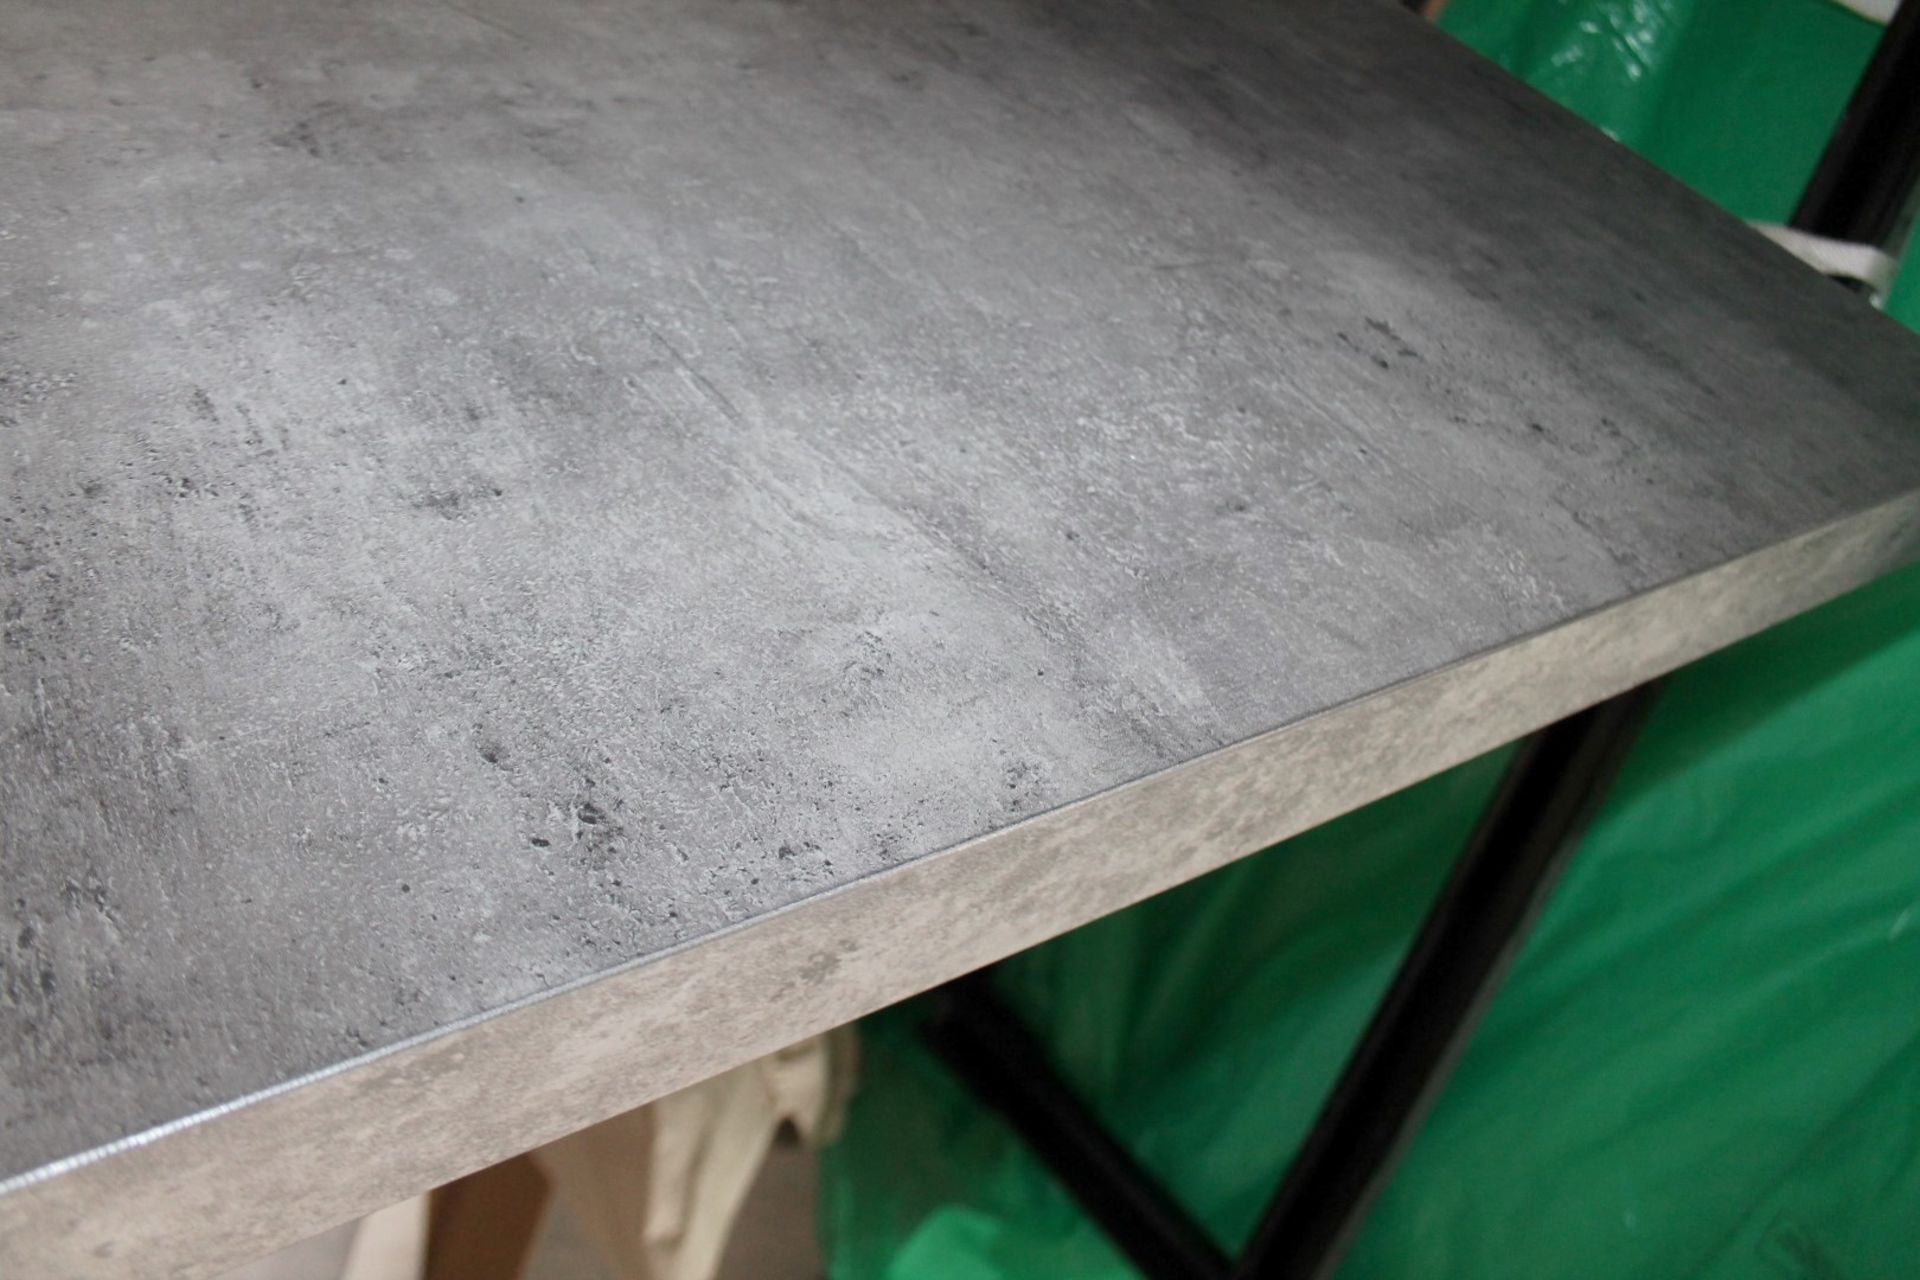 1 x Temahome 'Apex' Concrete-style and Black Extending Dining Table Top (No Base) - Dimensions: - Image 4 of 6